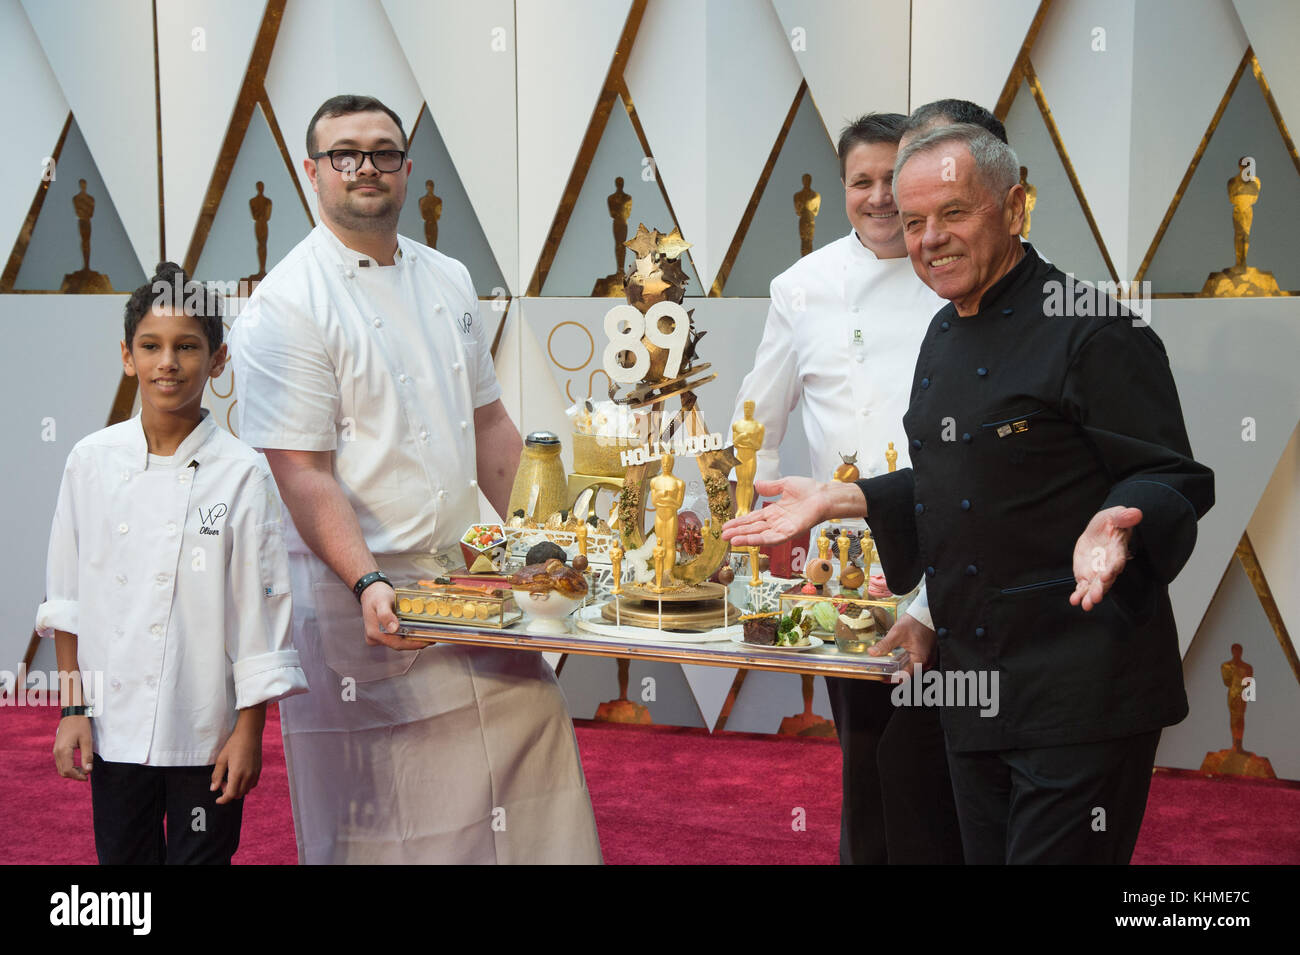 HOLLYWOOD, CA - FEBRUARY 26: Wolfgang Puck attends the 89th Annual Academy Awards at Hollywood & Highland Center on February 26, 2017 in Hollywood, California  People:  Wolfgang Puck  Transmission Ref:  MNC Stock Photo